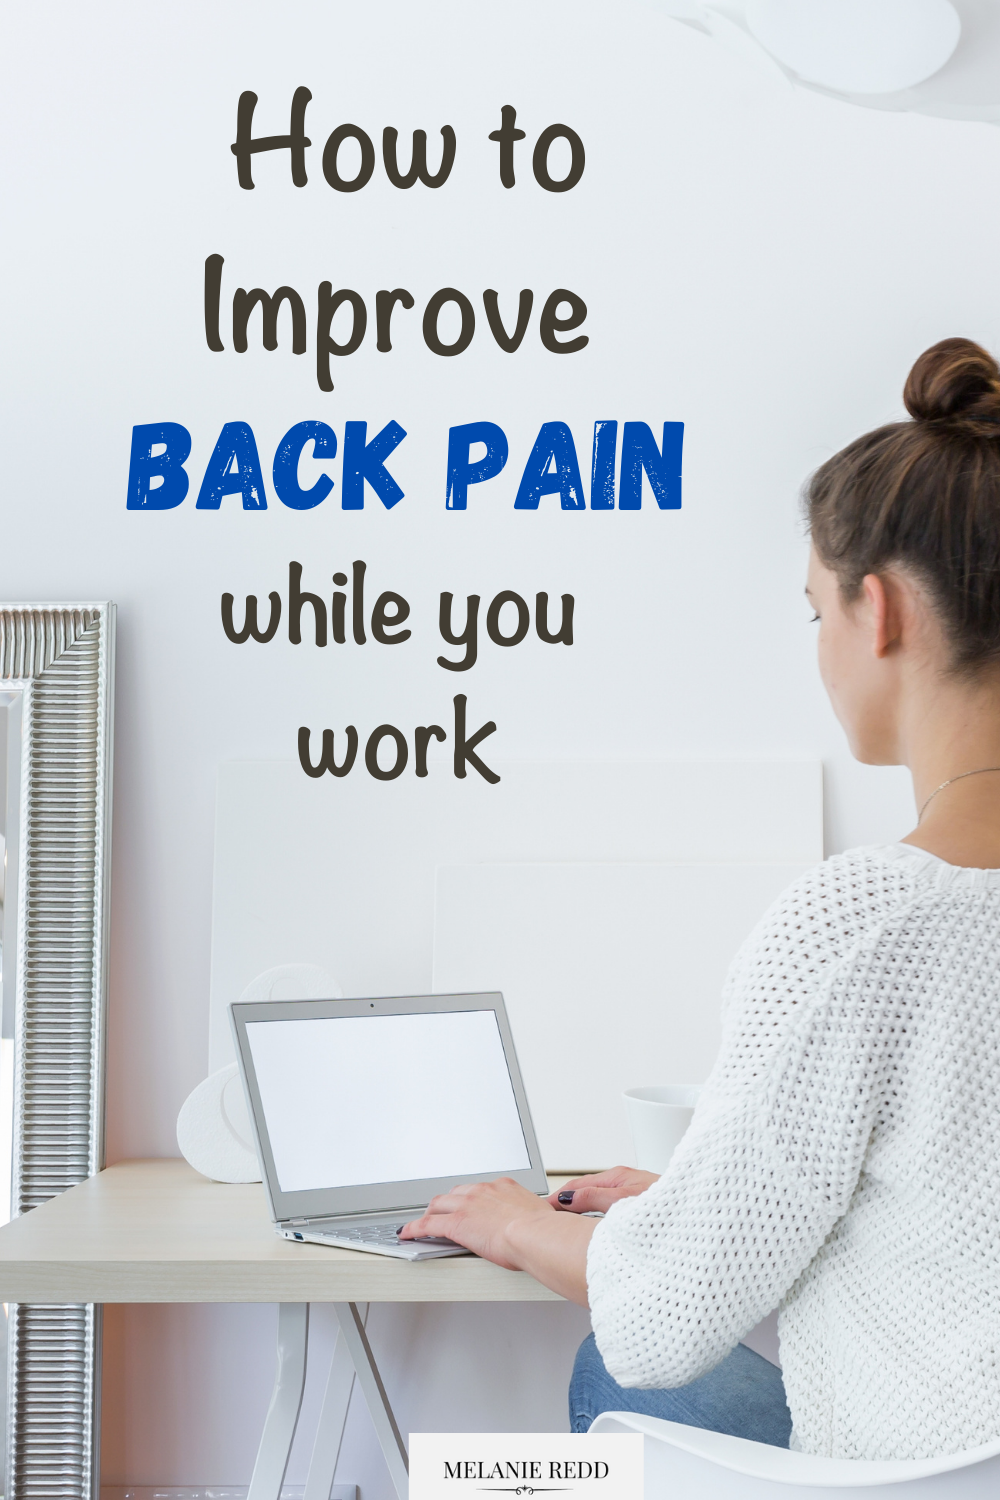 Unfortunately, some of us will experience discomfort as we work. There may be a solution. Here is how to improve back pain while you work.